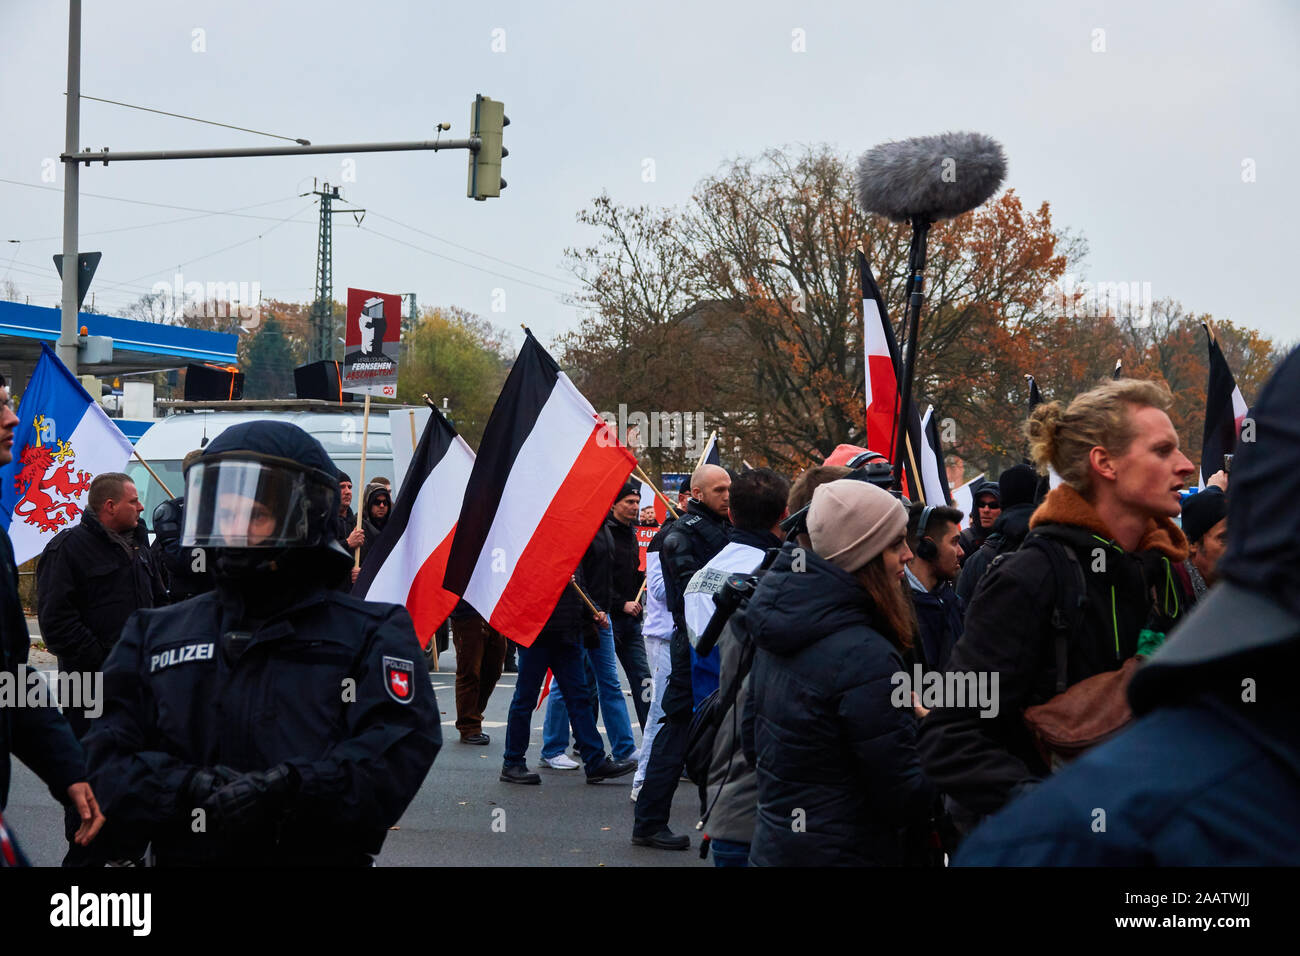 Hannover, Germany, November 23., 2019: Demonstration of the right-wing extremist National Socialist NPD with old black-white-red flags of the German R Stock Photo